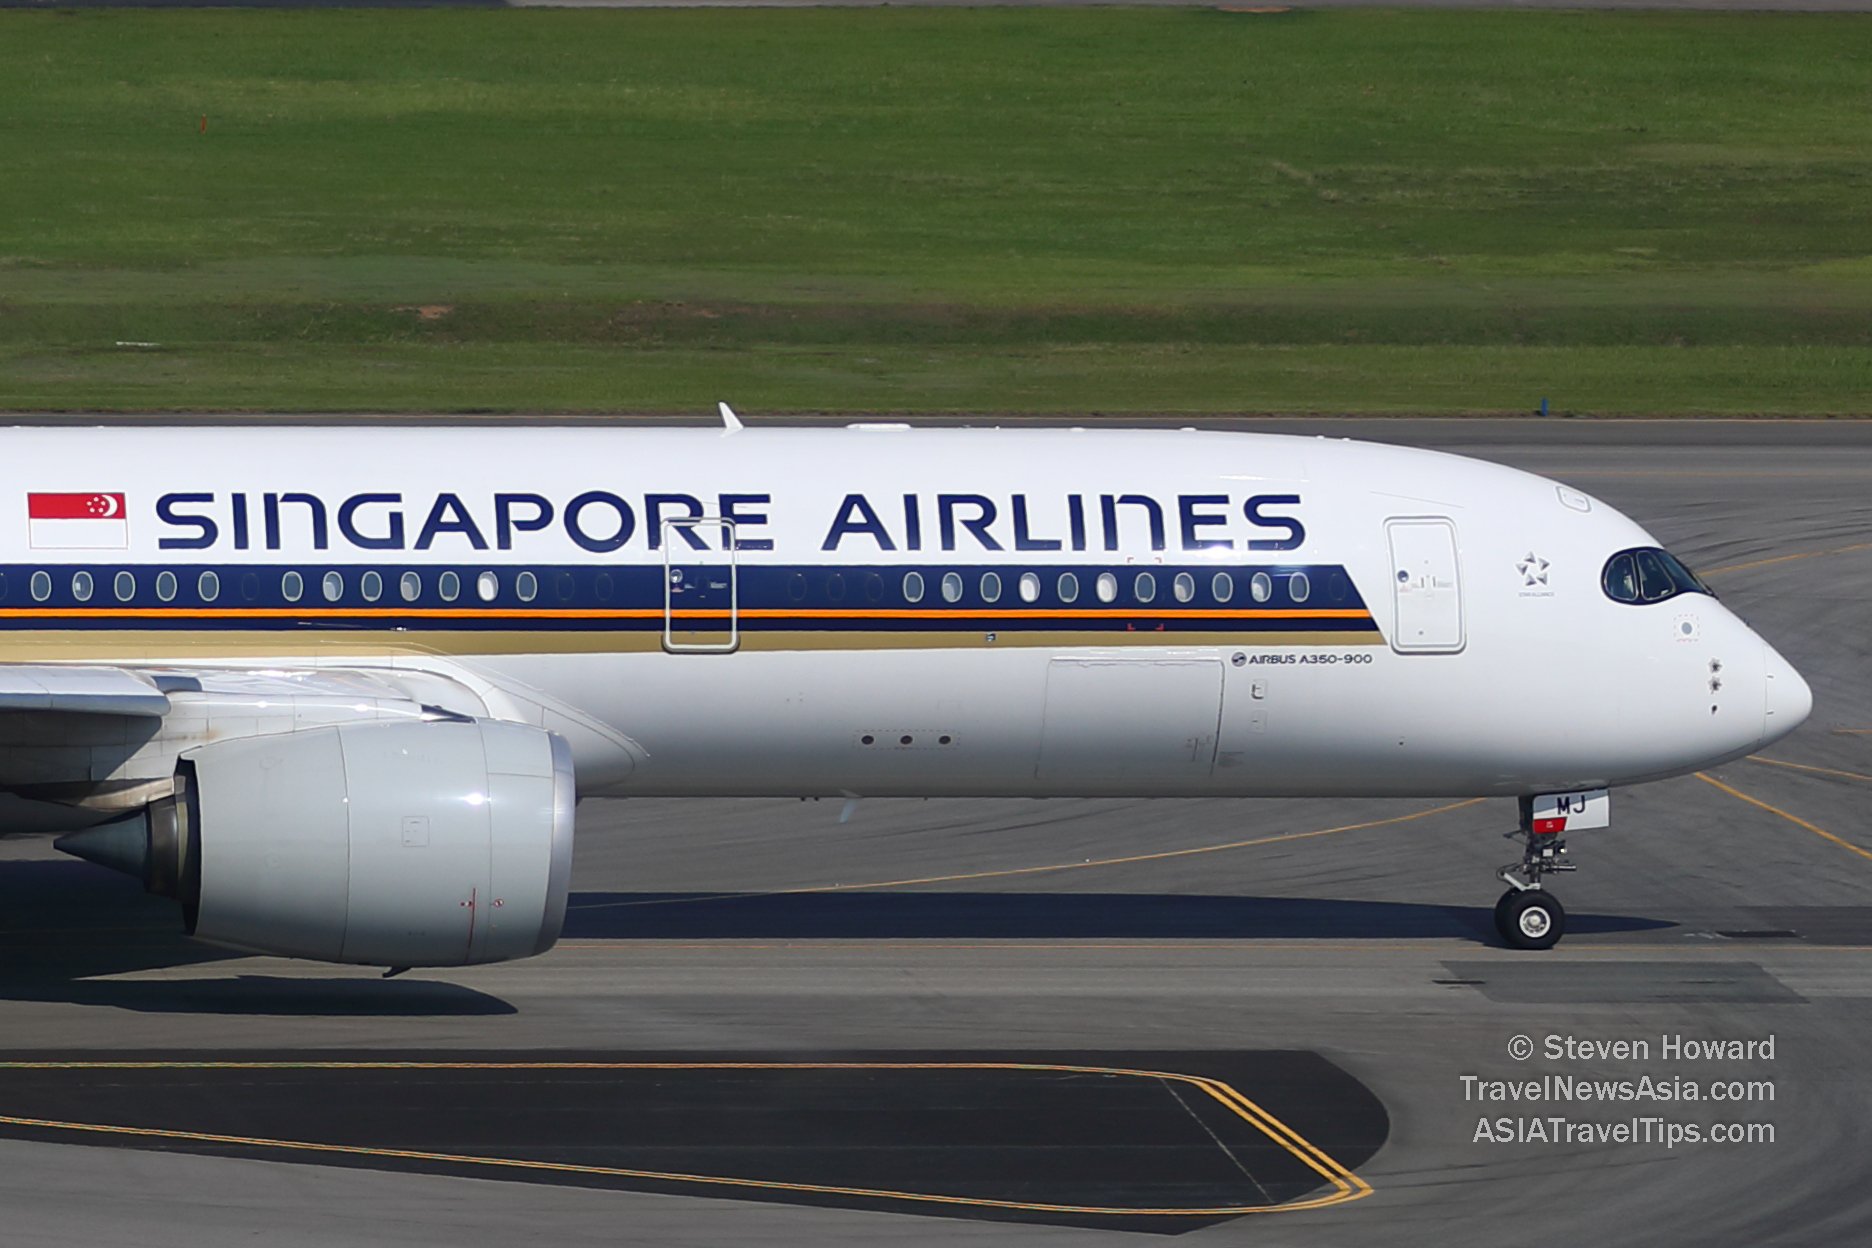 Singapore Airlines Airbus A350-900 reg: 9V-SMJ. Picture by Steven Howard of TravelNewsAsia.com Click to enlarge.